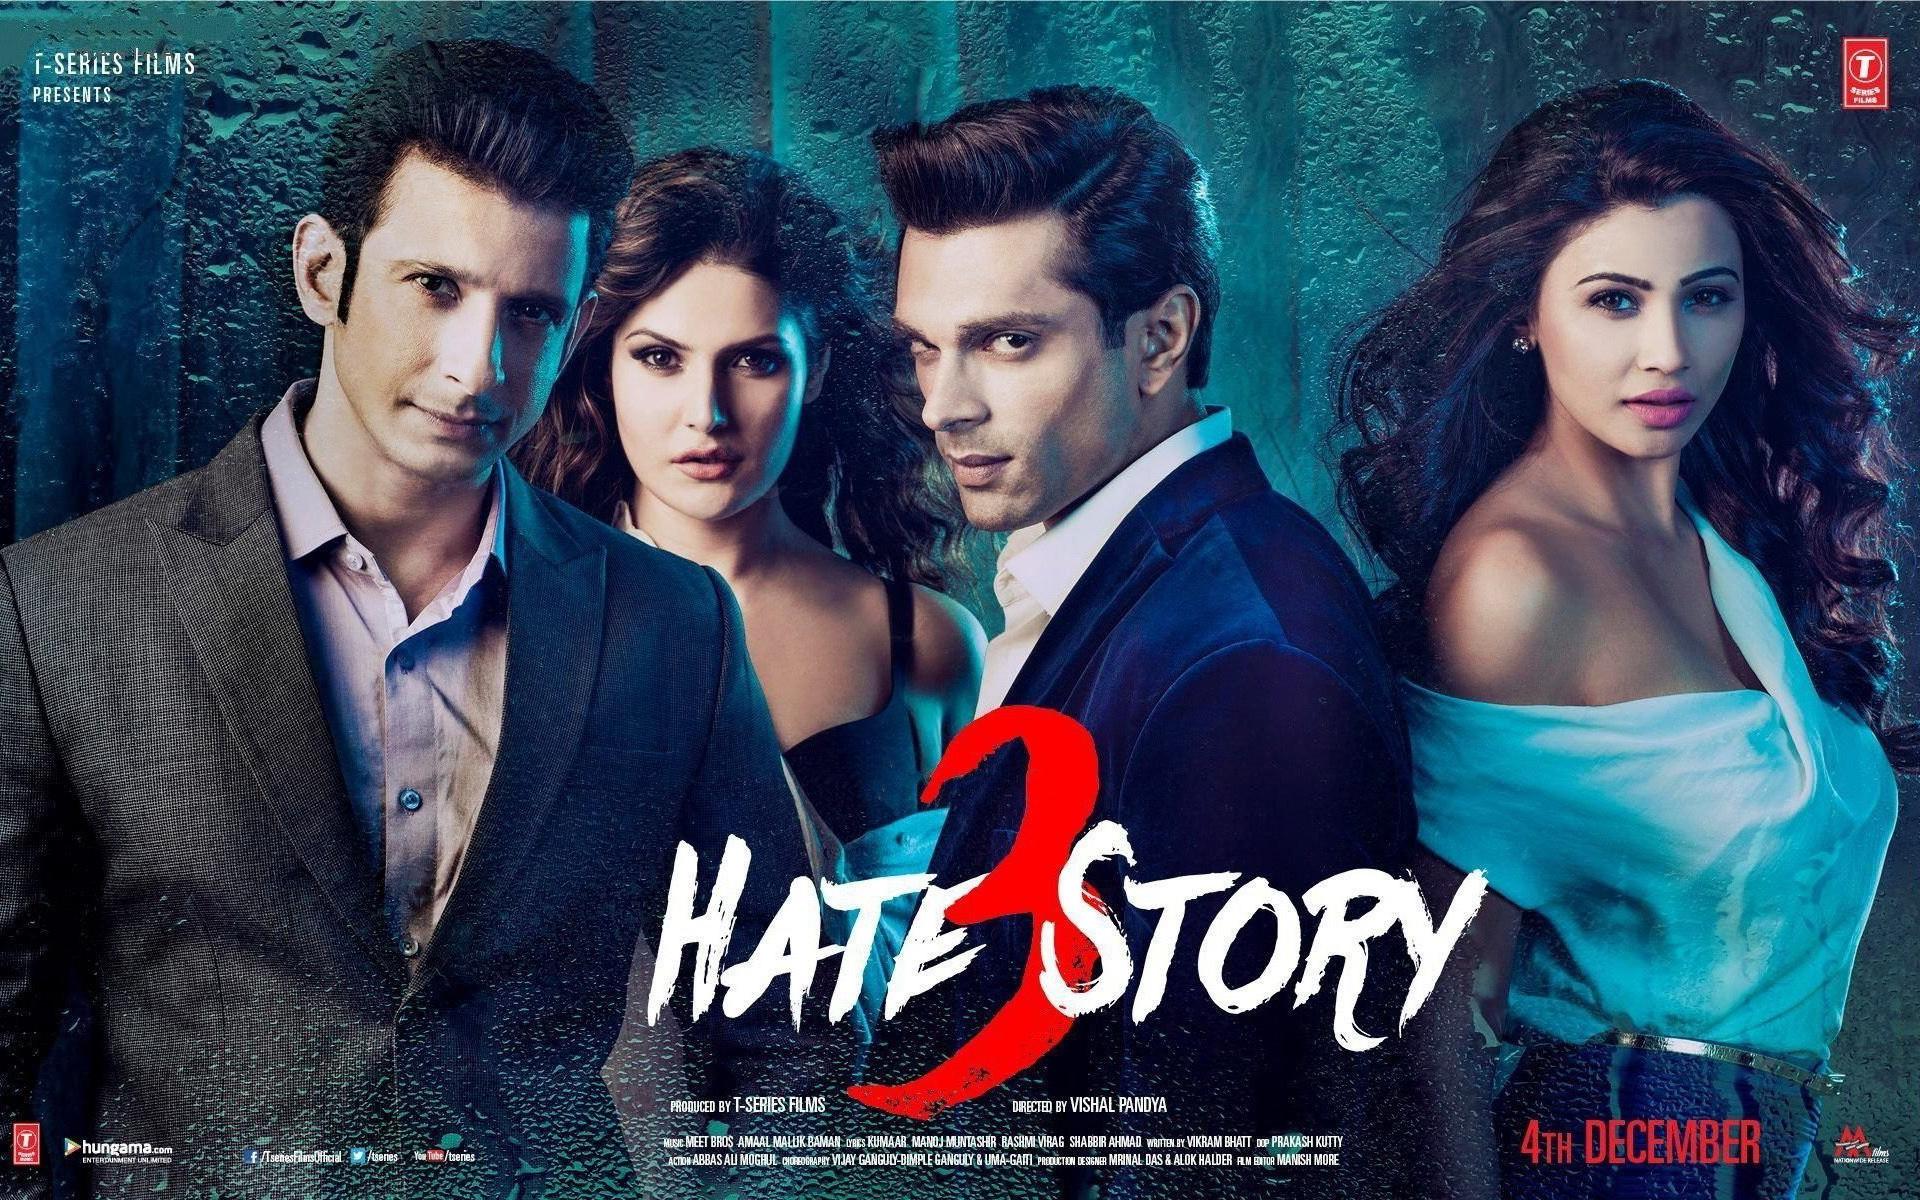 Hate Story 3 Wallpaper - Hate Story 3 Poster Hd , HD Wallpaper & Backgrounds